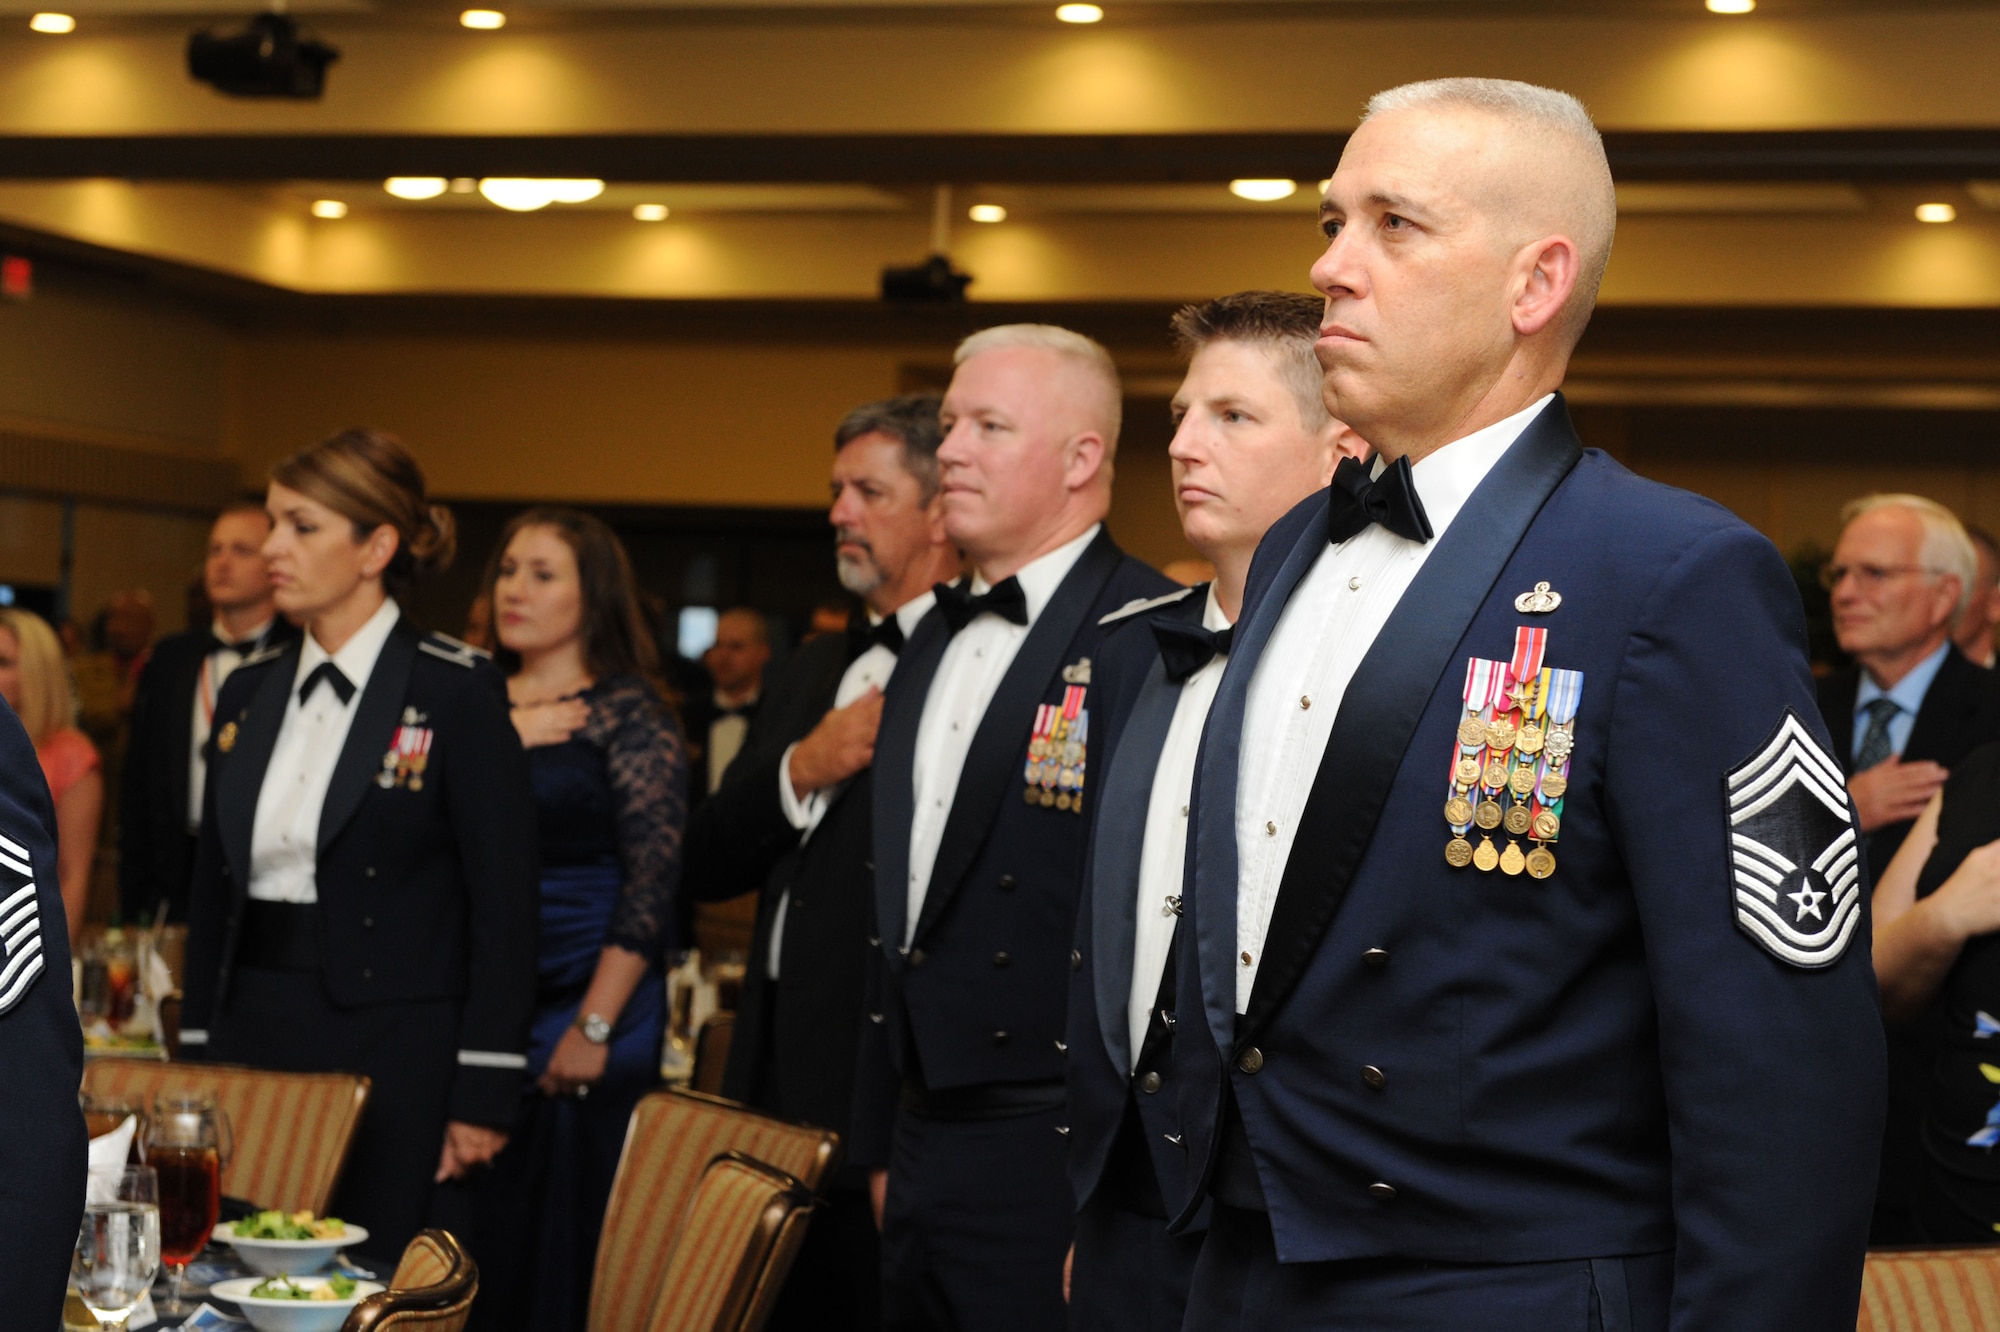 Chief Master Sgt. Robert Winters, 81st Training Group superintendent, stands at attention during the playing of the national anthem at the Senior Noncommissioned Officer Induction Ceremony at the Bay Breeze Event Center Aug. 18, 2016, on Keesler Air Force Base, Miss. Thirty-seven enlisted members were recognized and received a commemorative medallion at the event.  (U.S. Air Force photo by Kemberly Groue/Released)